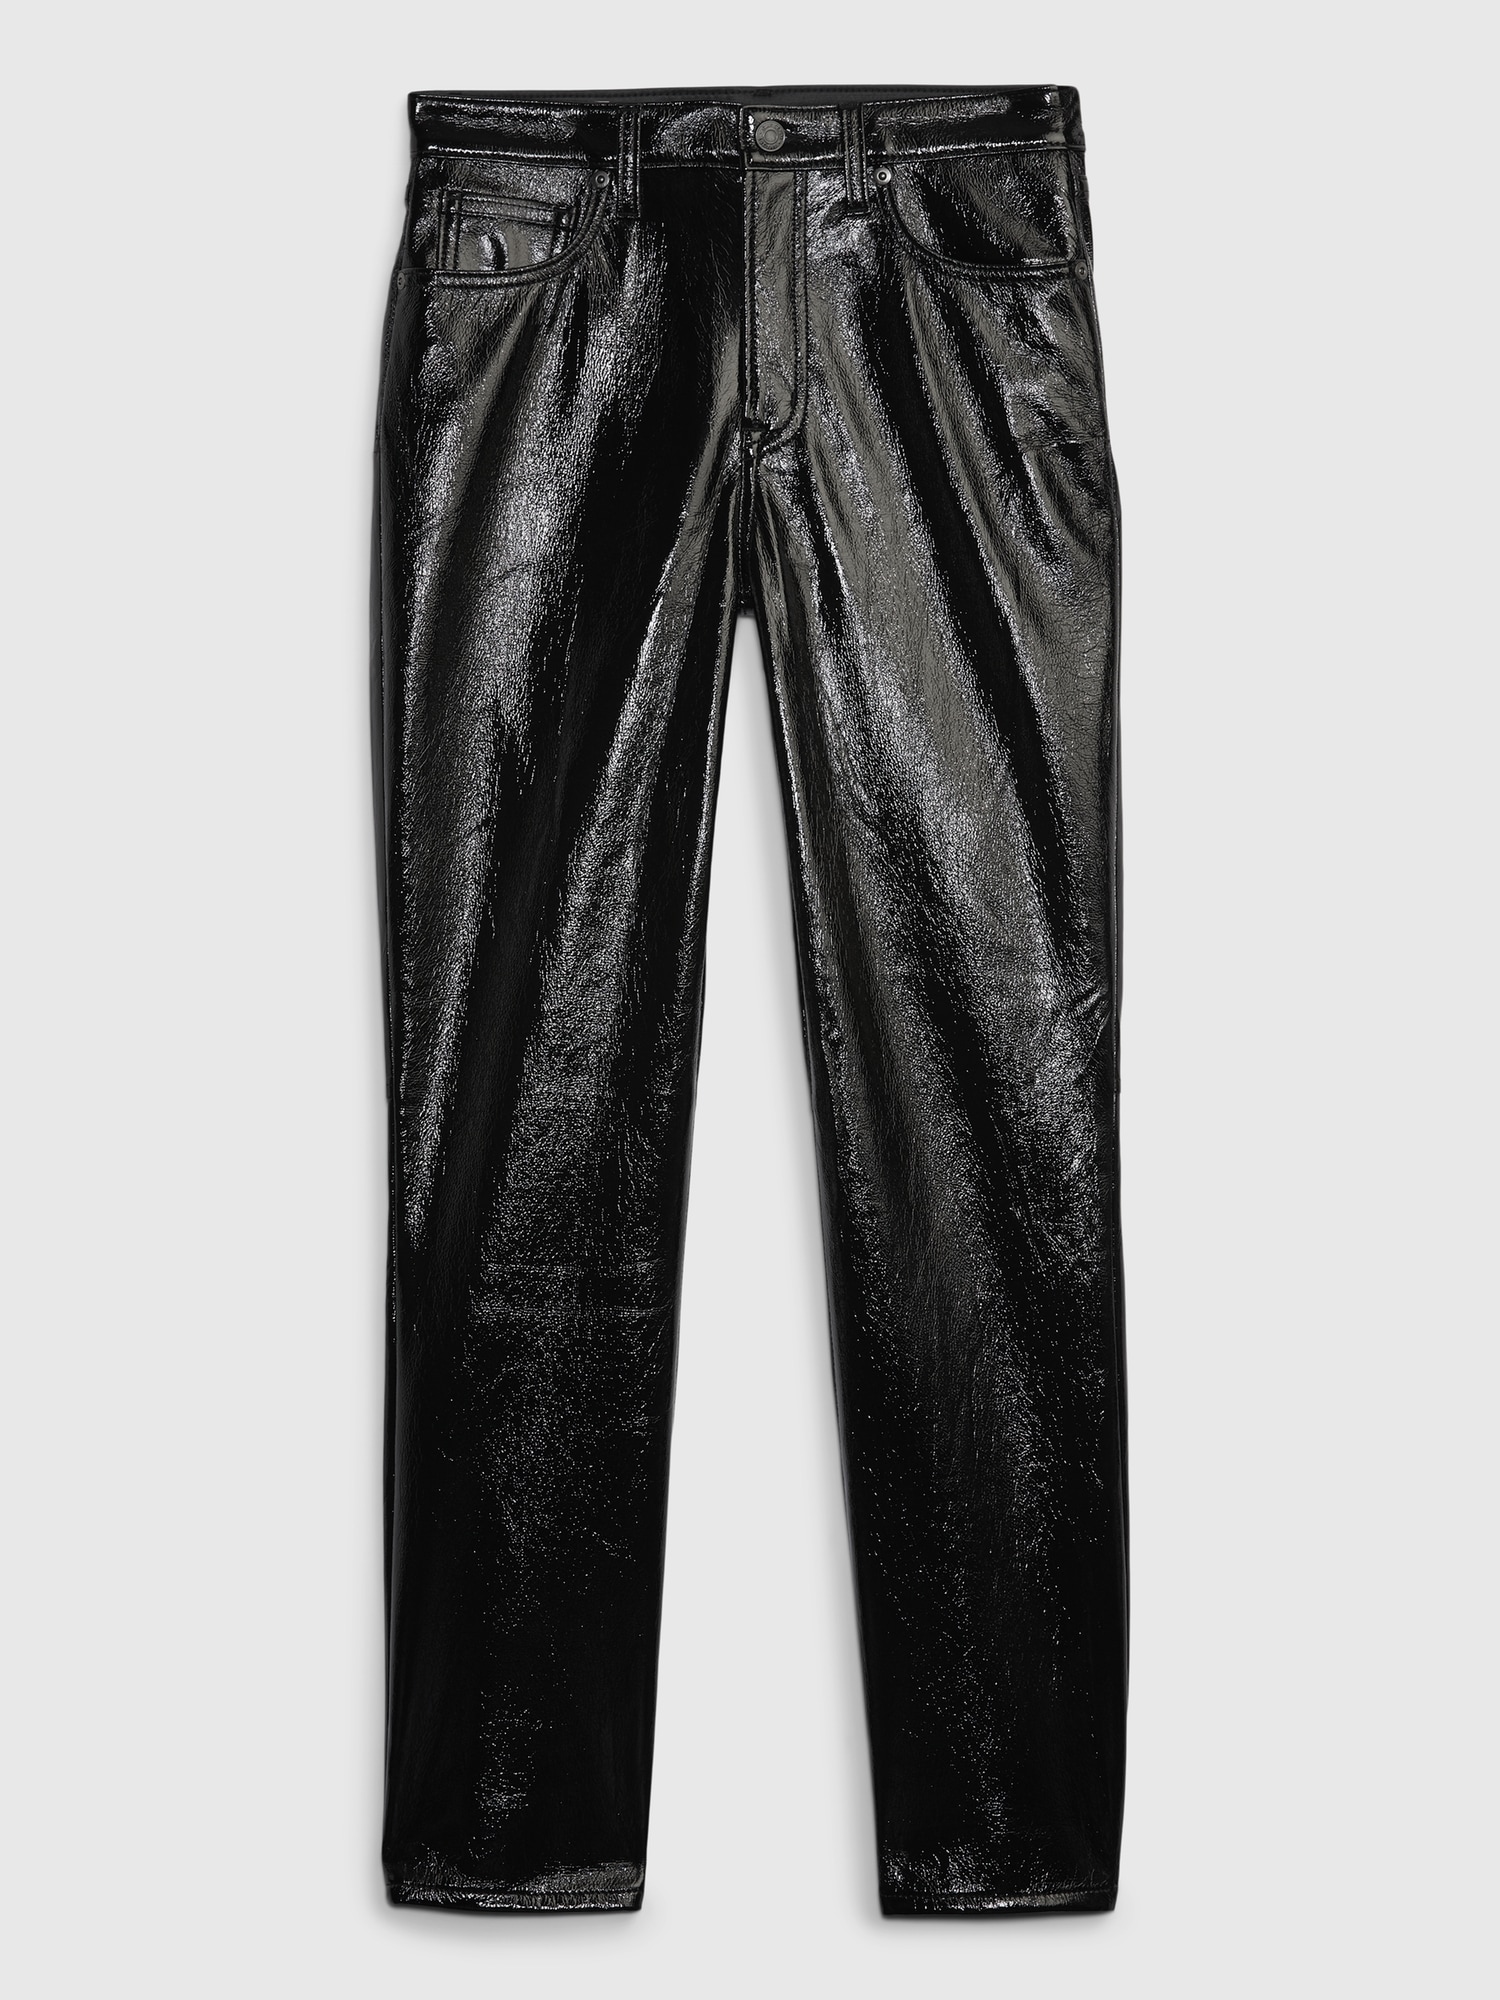 Patent Leather Pants -  Canada